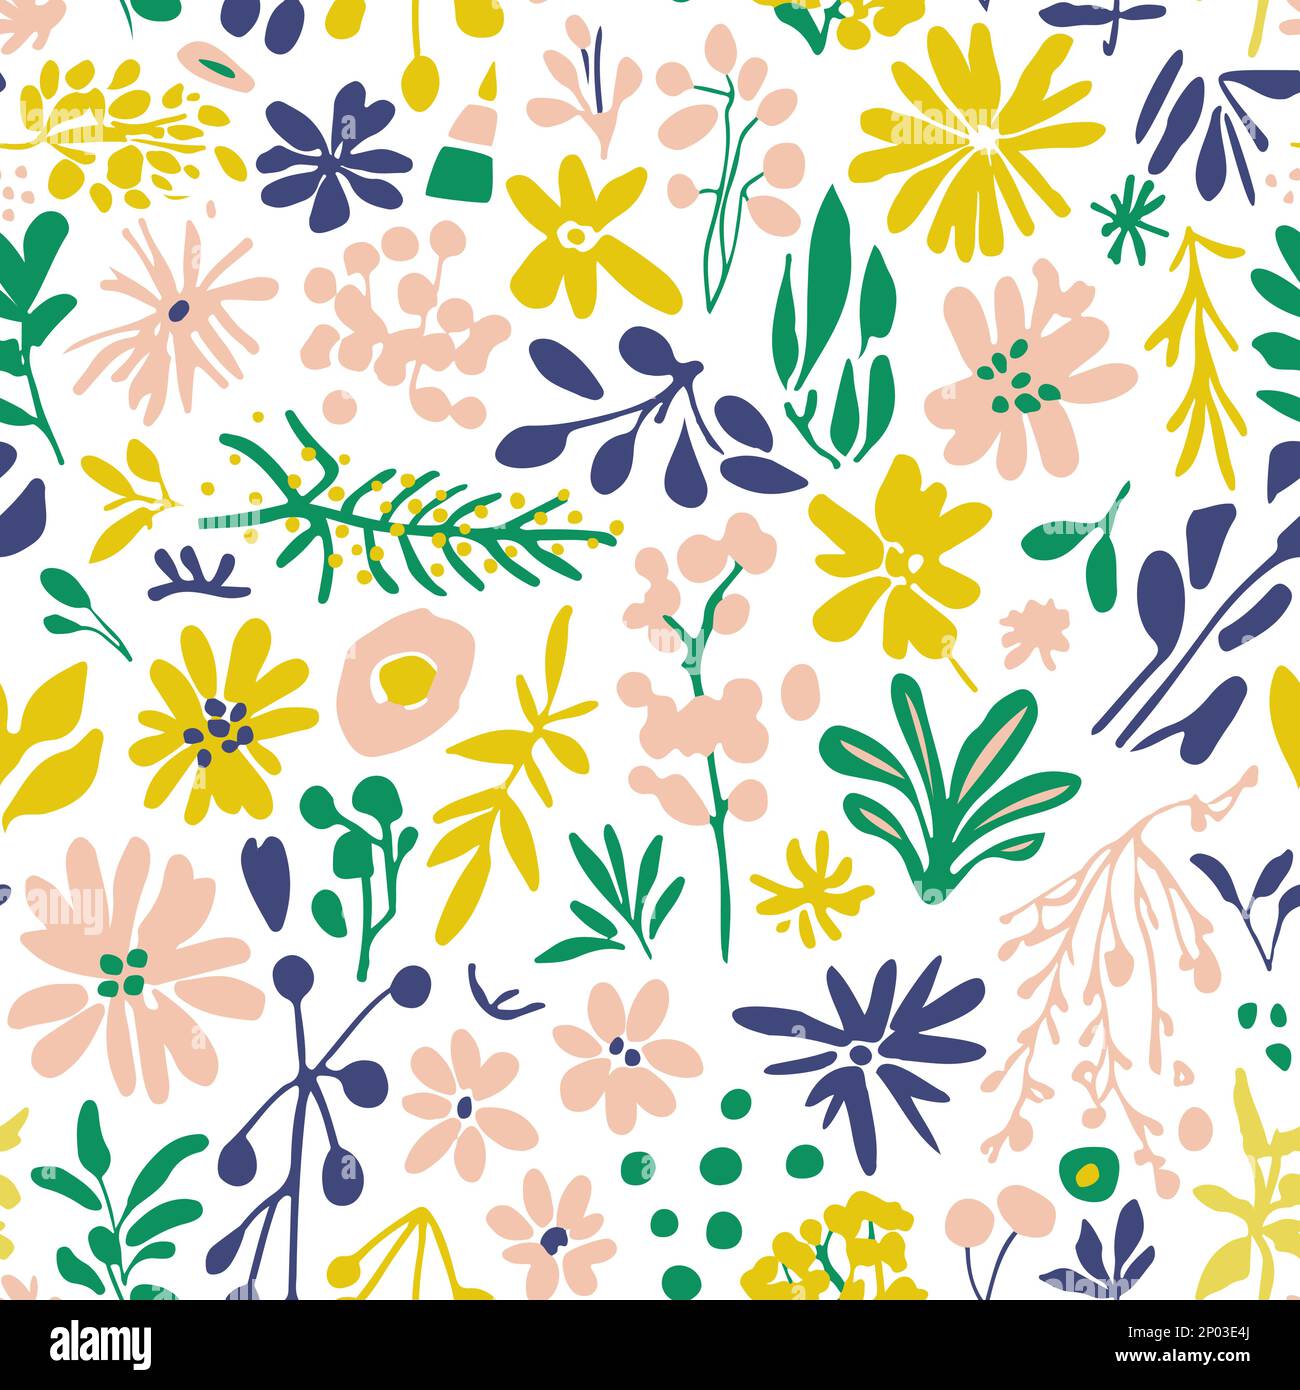 Vector Retro Vintage Minimalist Abstract Spring or Summer Floral Seamless Surface Pattern for Products, Fabric or Wrapping Paper Prints. Stock Vector